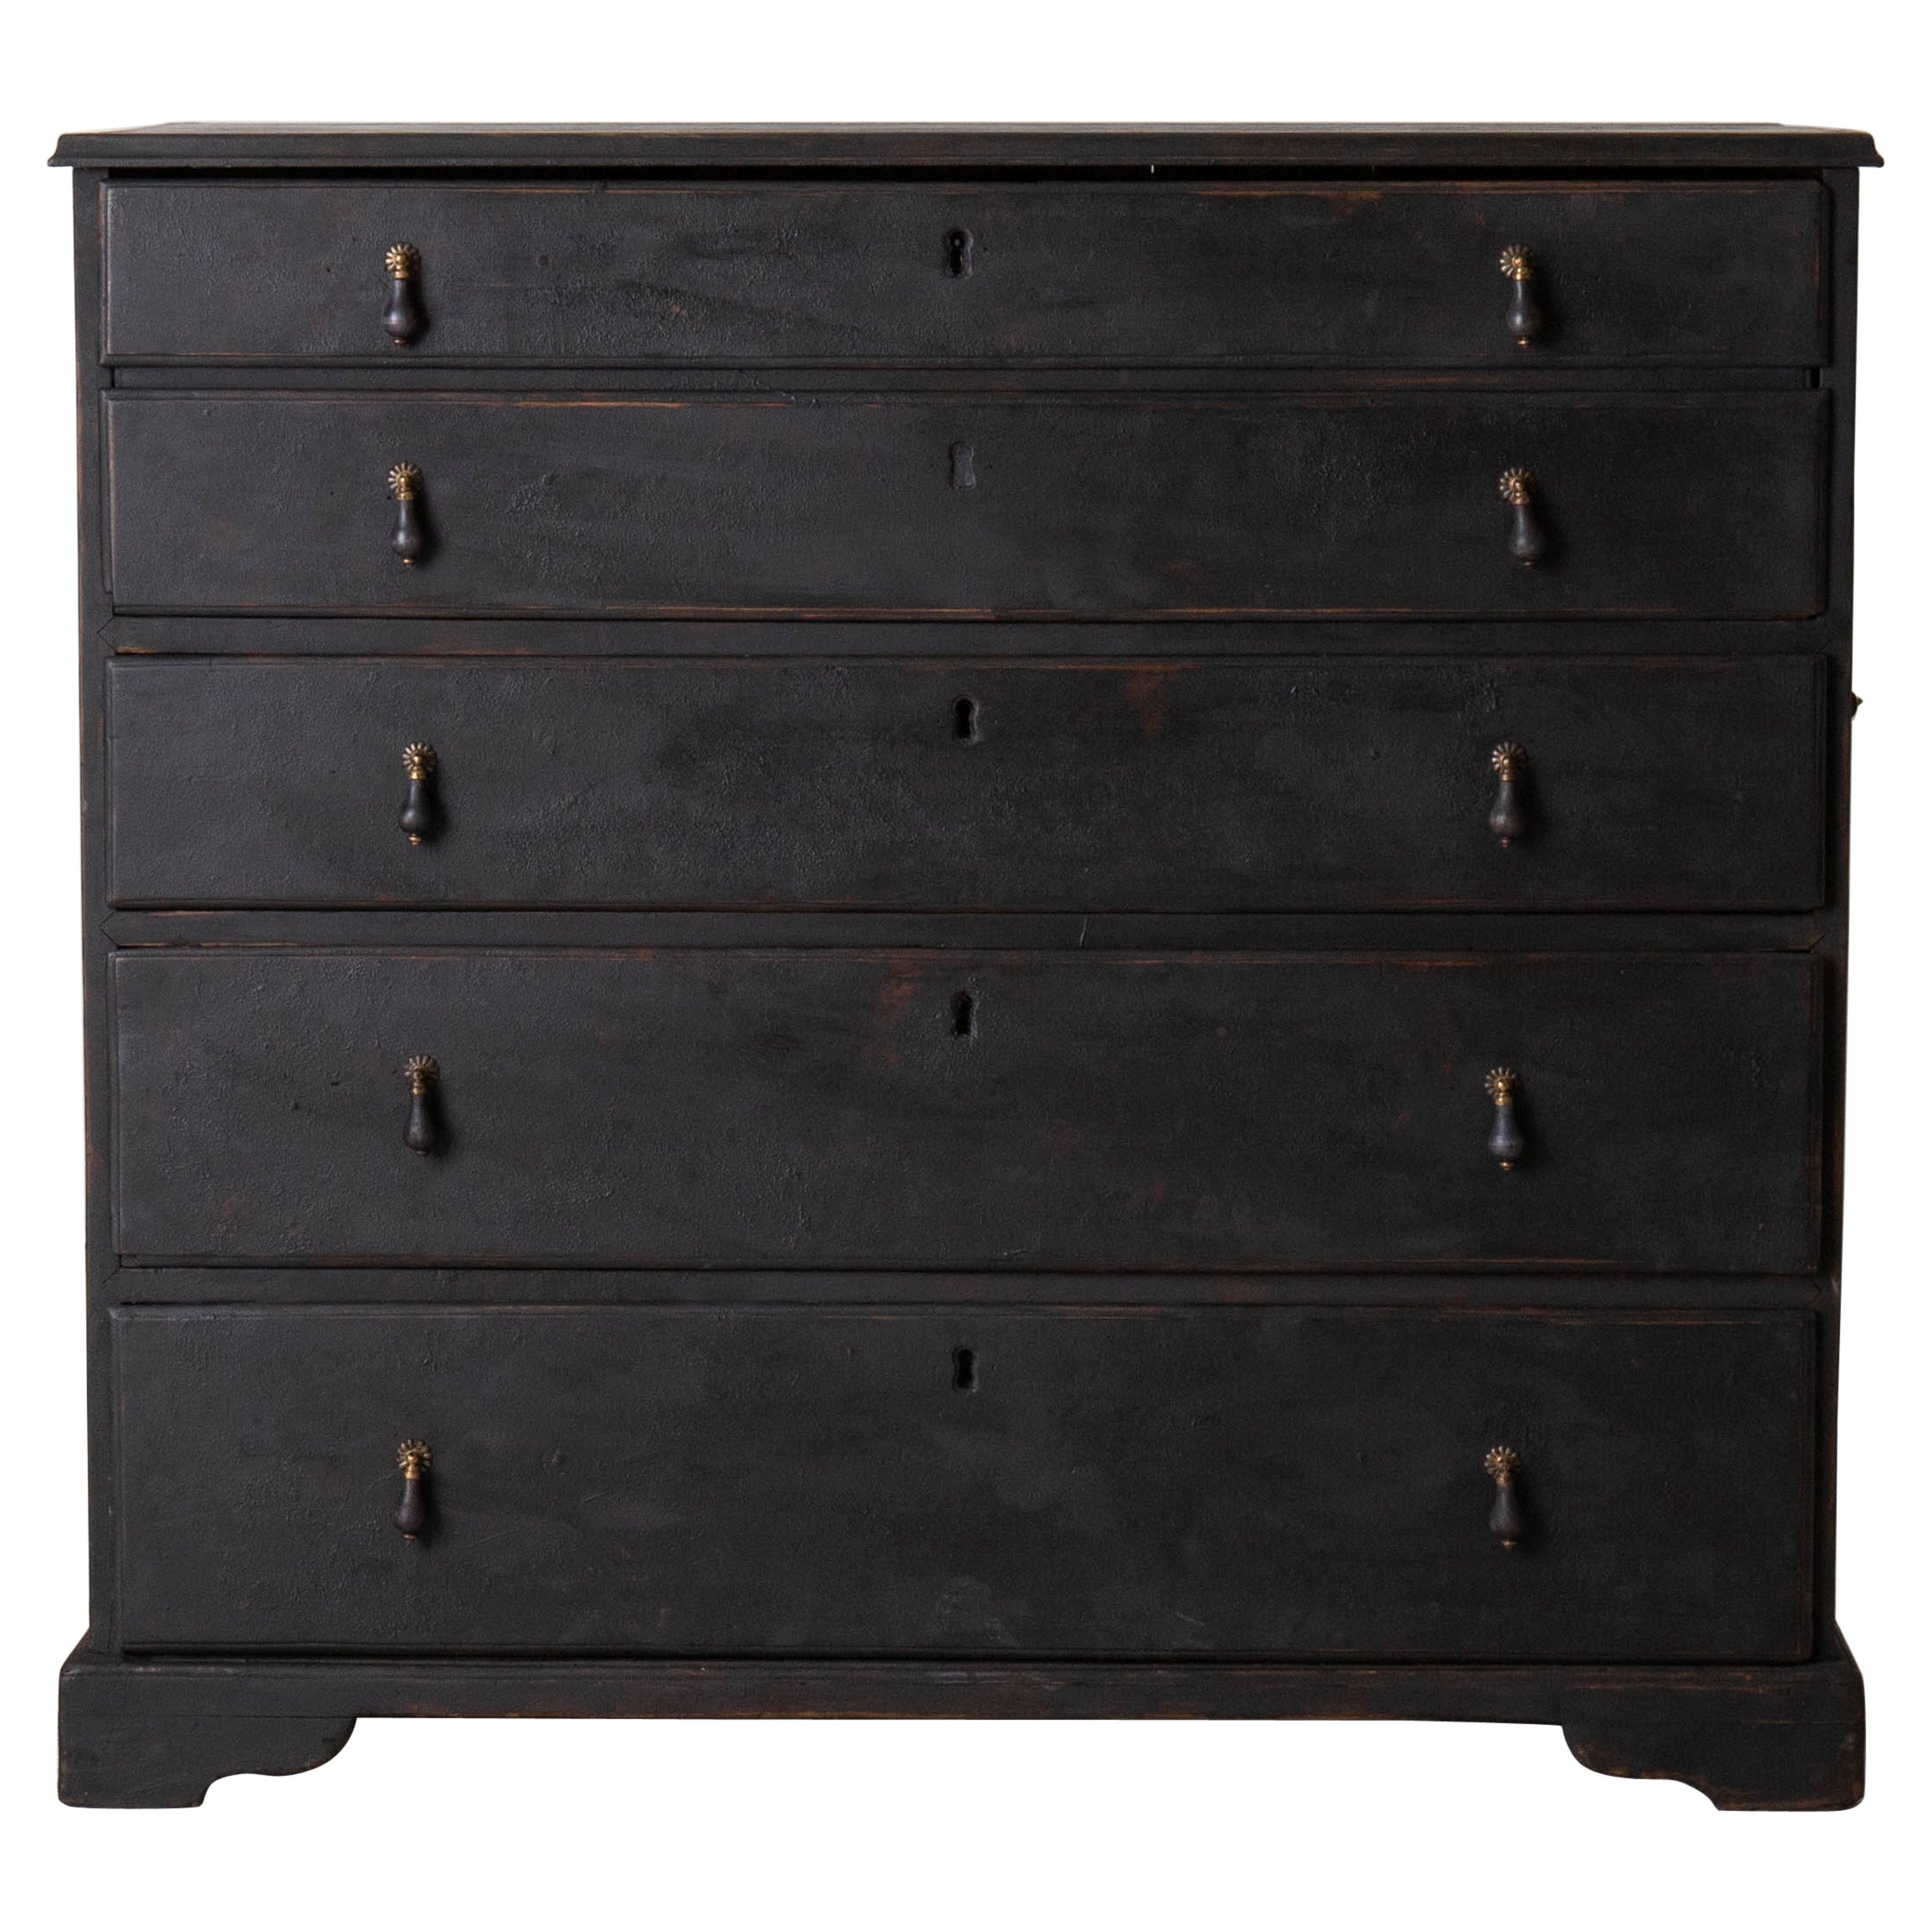 Chest of Drawers Writing Desk Top Black English 18th Century England